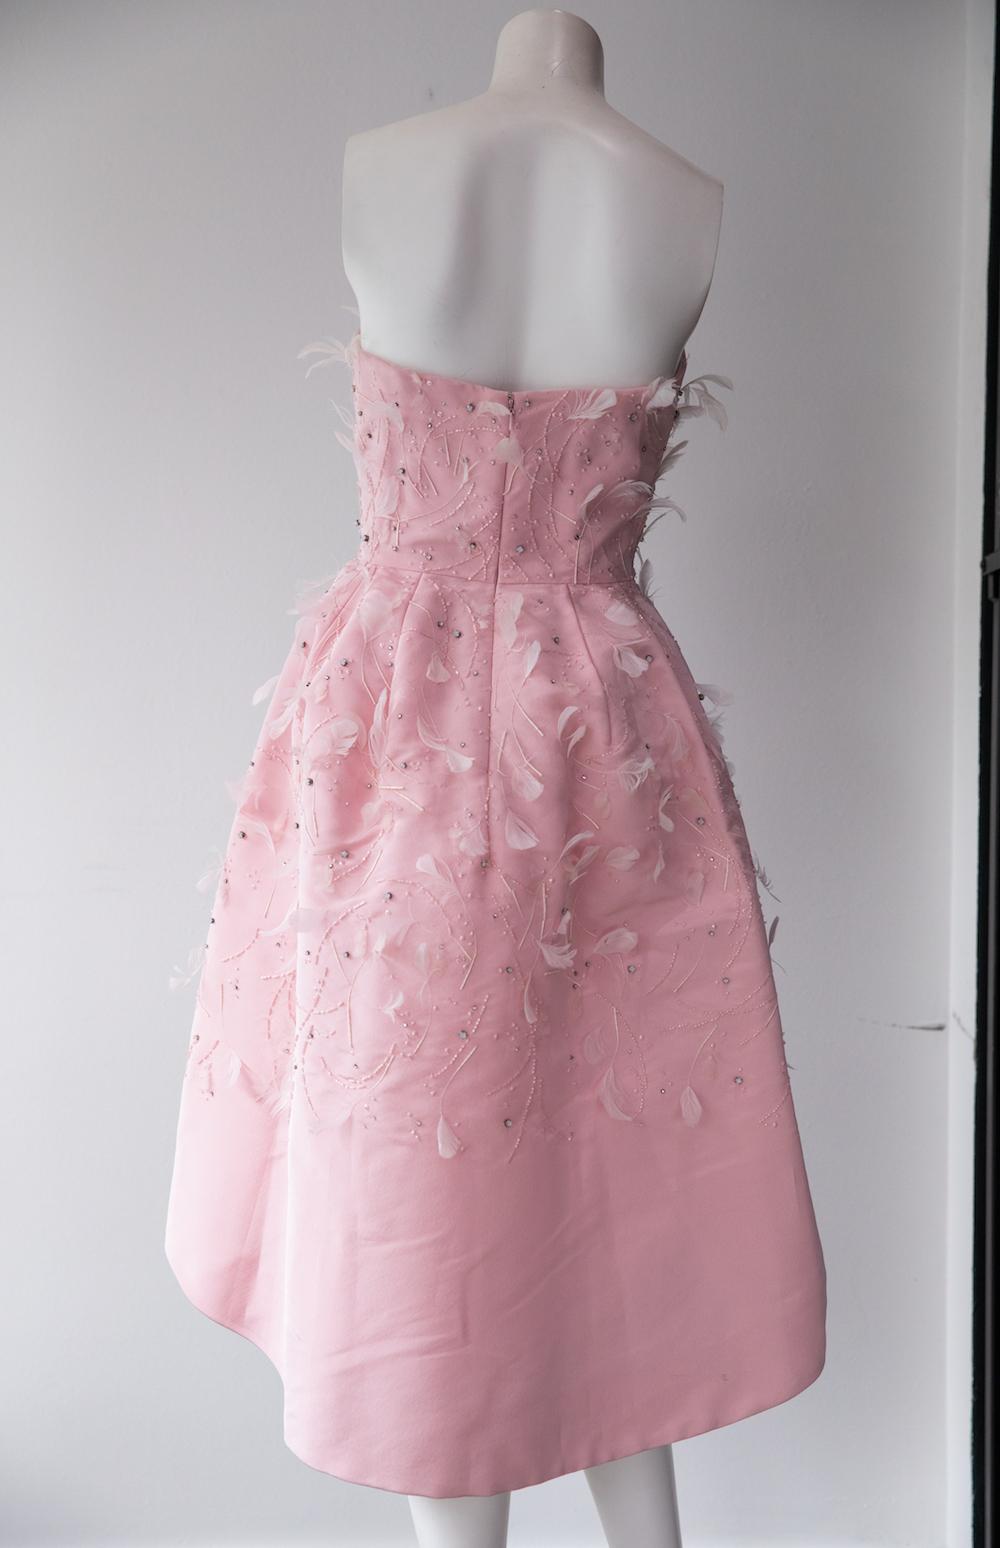 Full-skirted baby pink dress by Oscar De La Renta. This strapless, full skirted formal dress hits at the knee. It is reminiscent of 1950s glamour with coordinating pink feathers and beading throughout, and lined with nude mesh. 

Size US 8 (fits